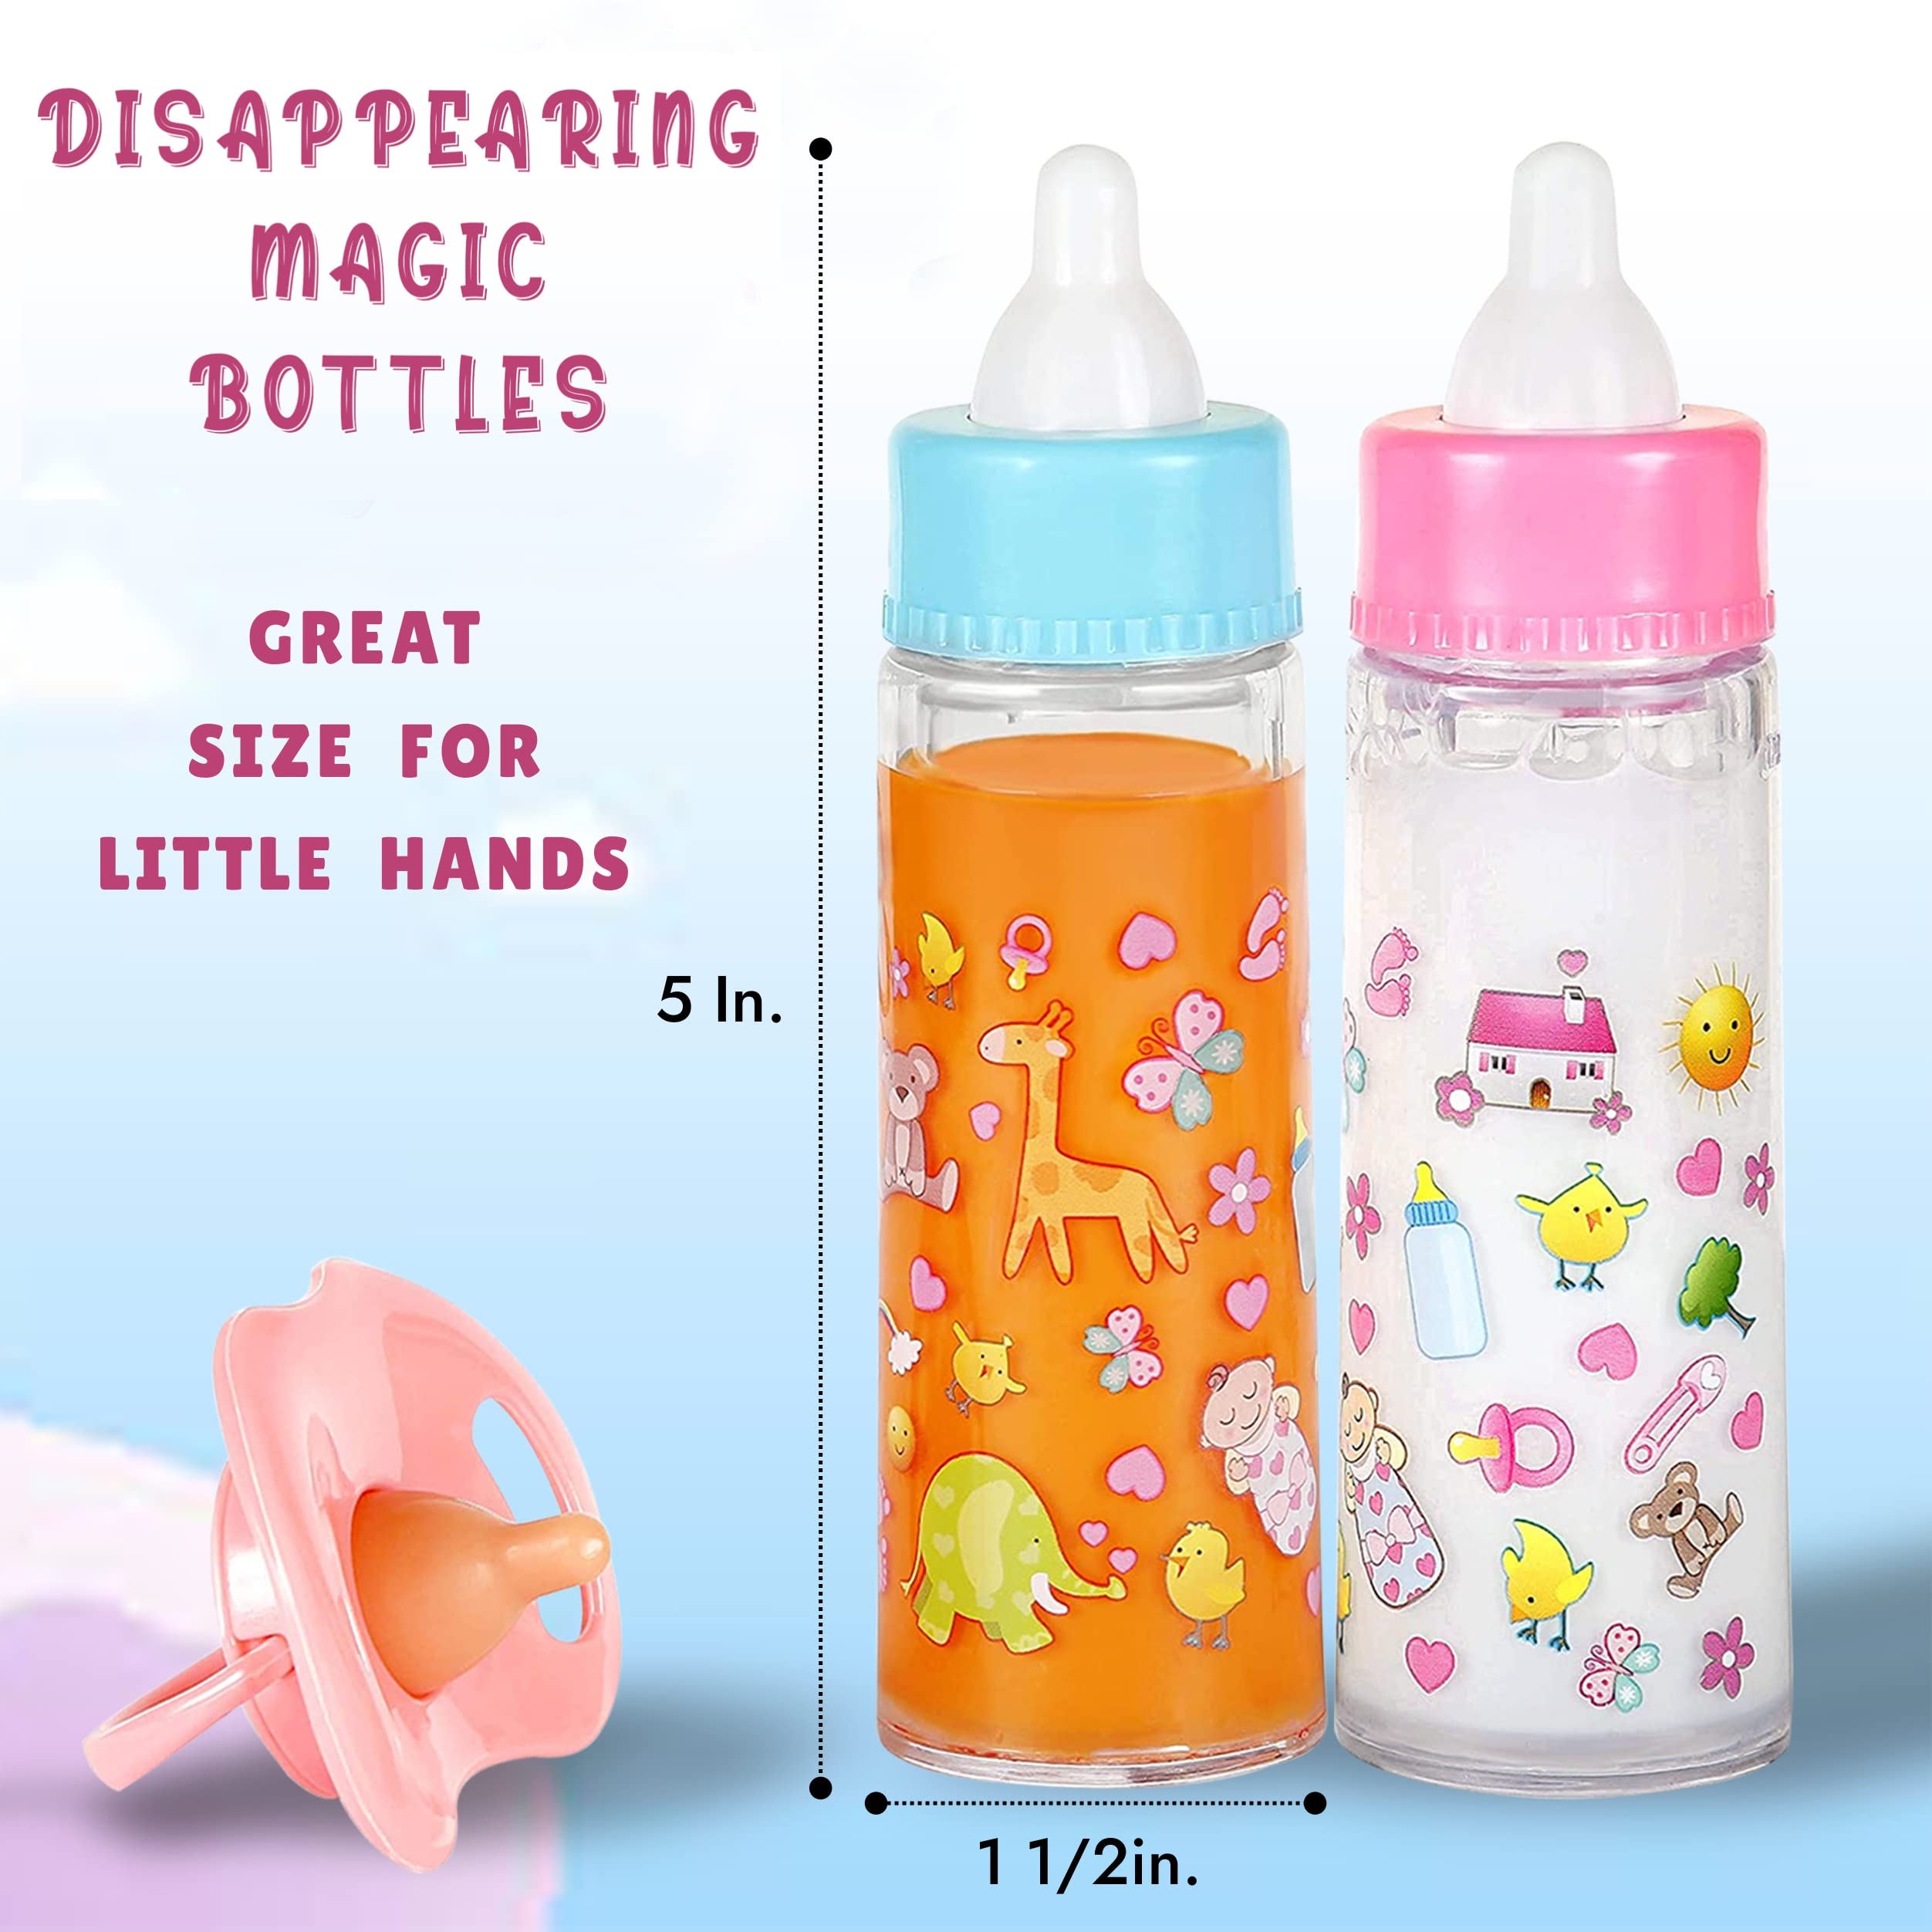 Exquisite Buggy My Sweet Baby Disappearing Magic Bottles - Includes 1 Milk, 1 Juice Bottle with Pacifier for Baby Doll (Colorful)